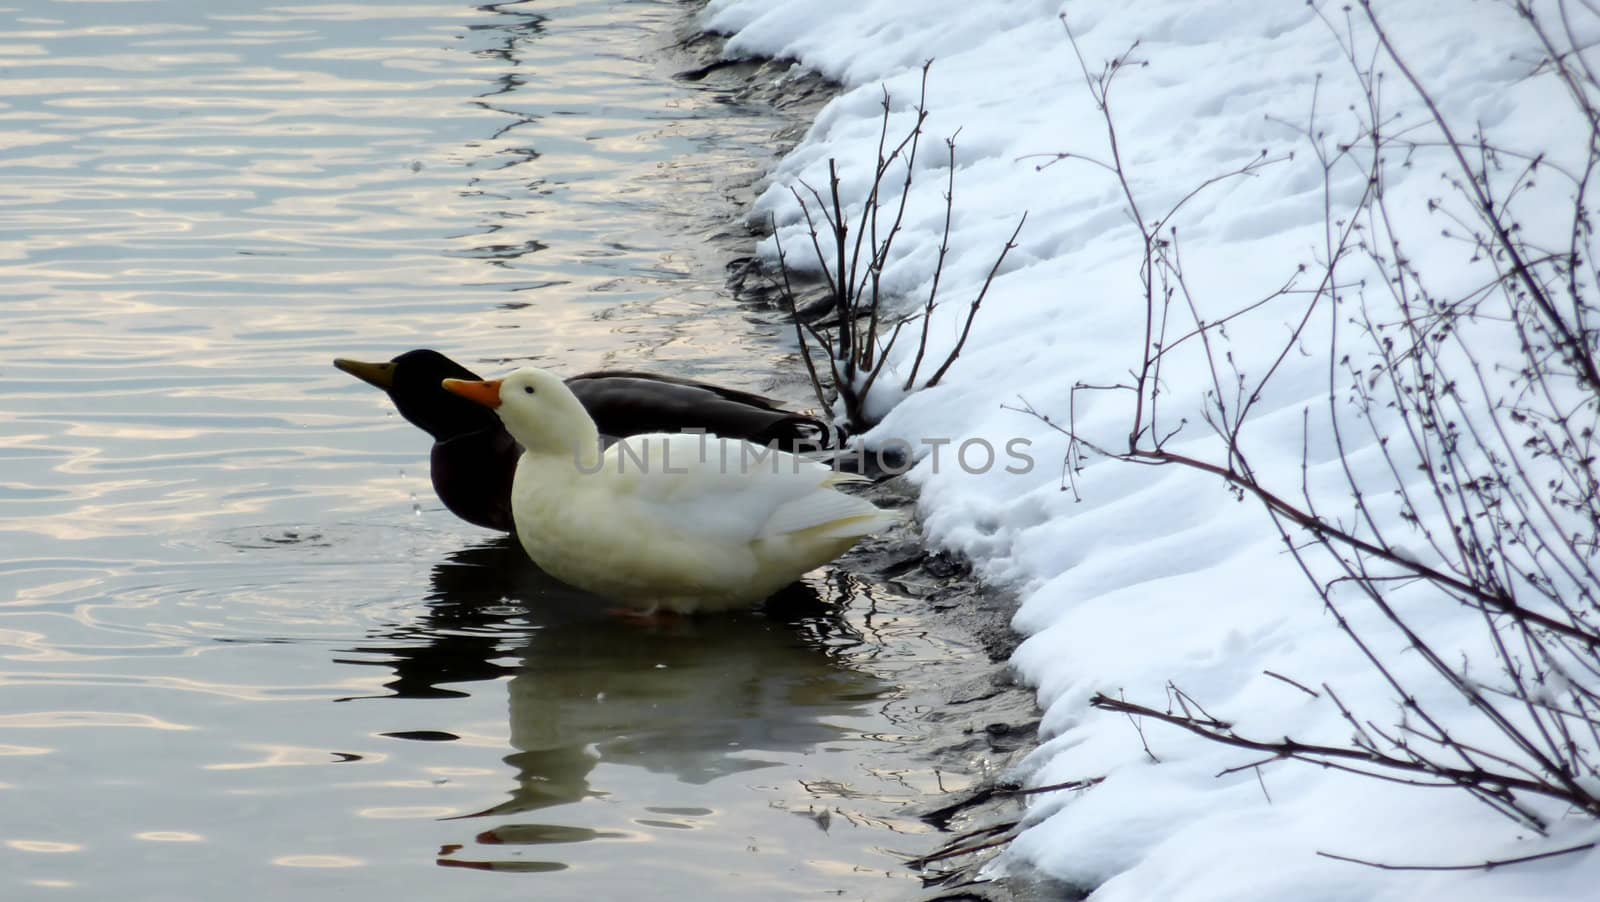 Two ducks on a snowy shore by Elenaphotos21